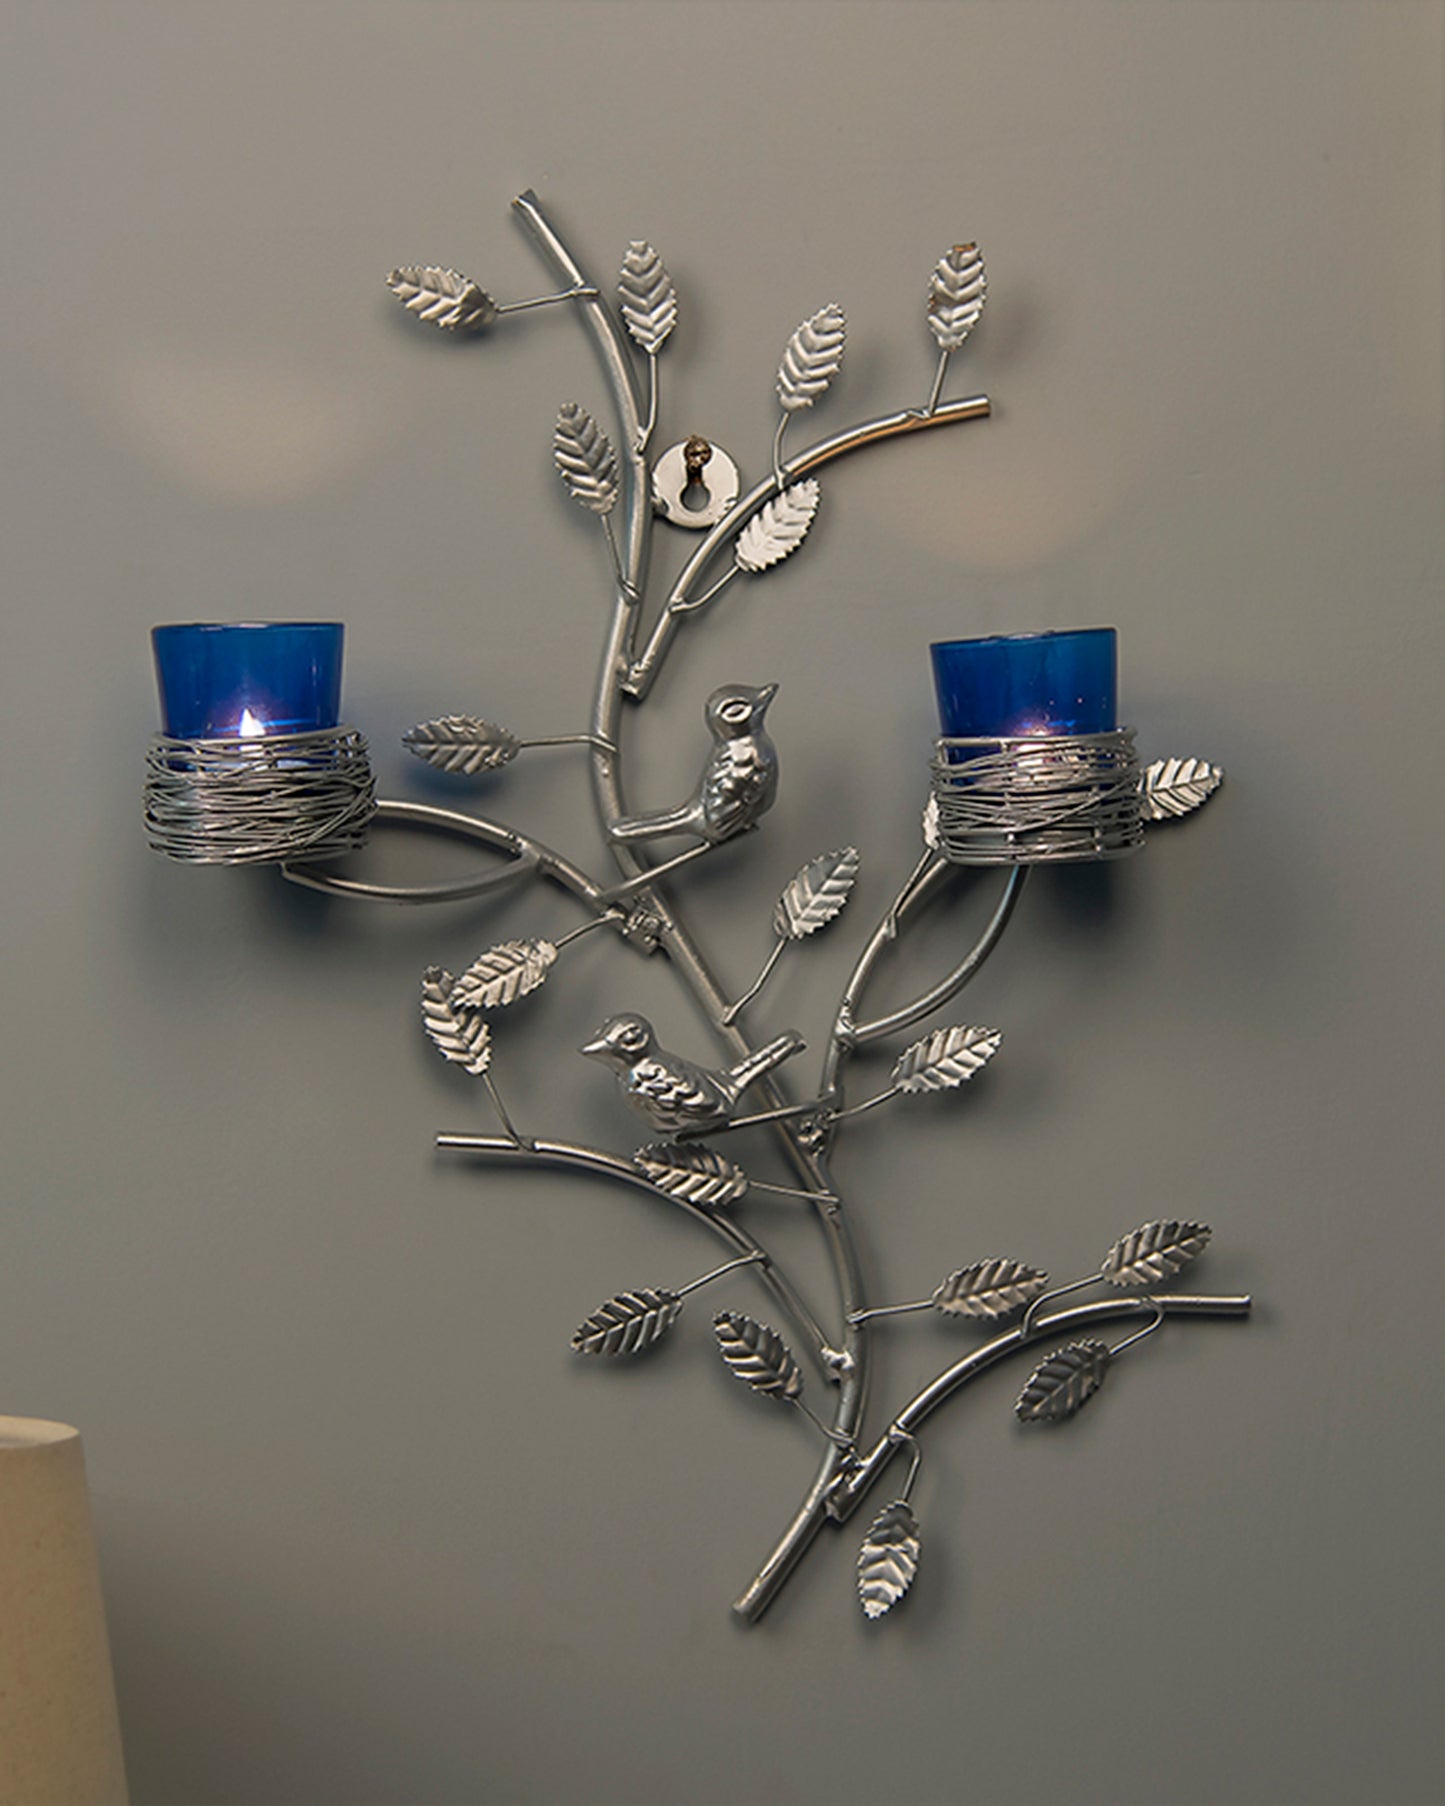 Silver Tree with Bird Nest Votive Stand , Wall Candle Holder and Tealight Candles